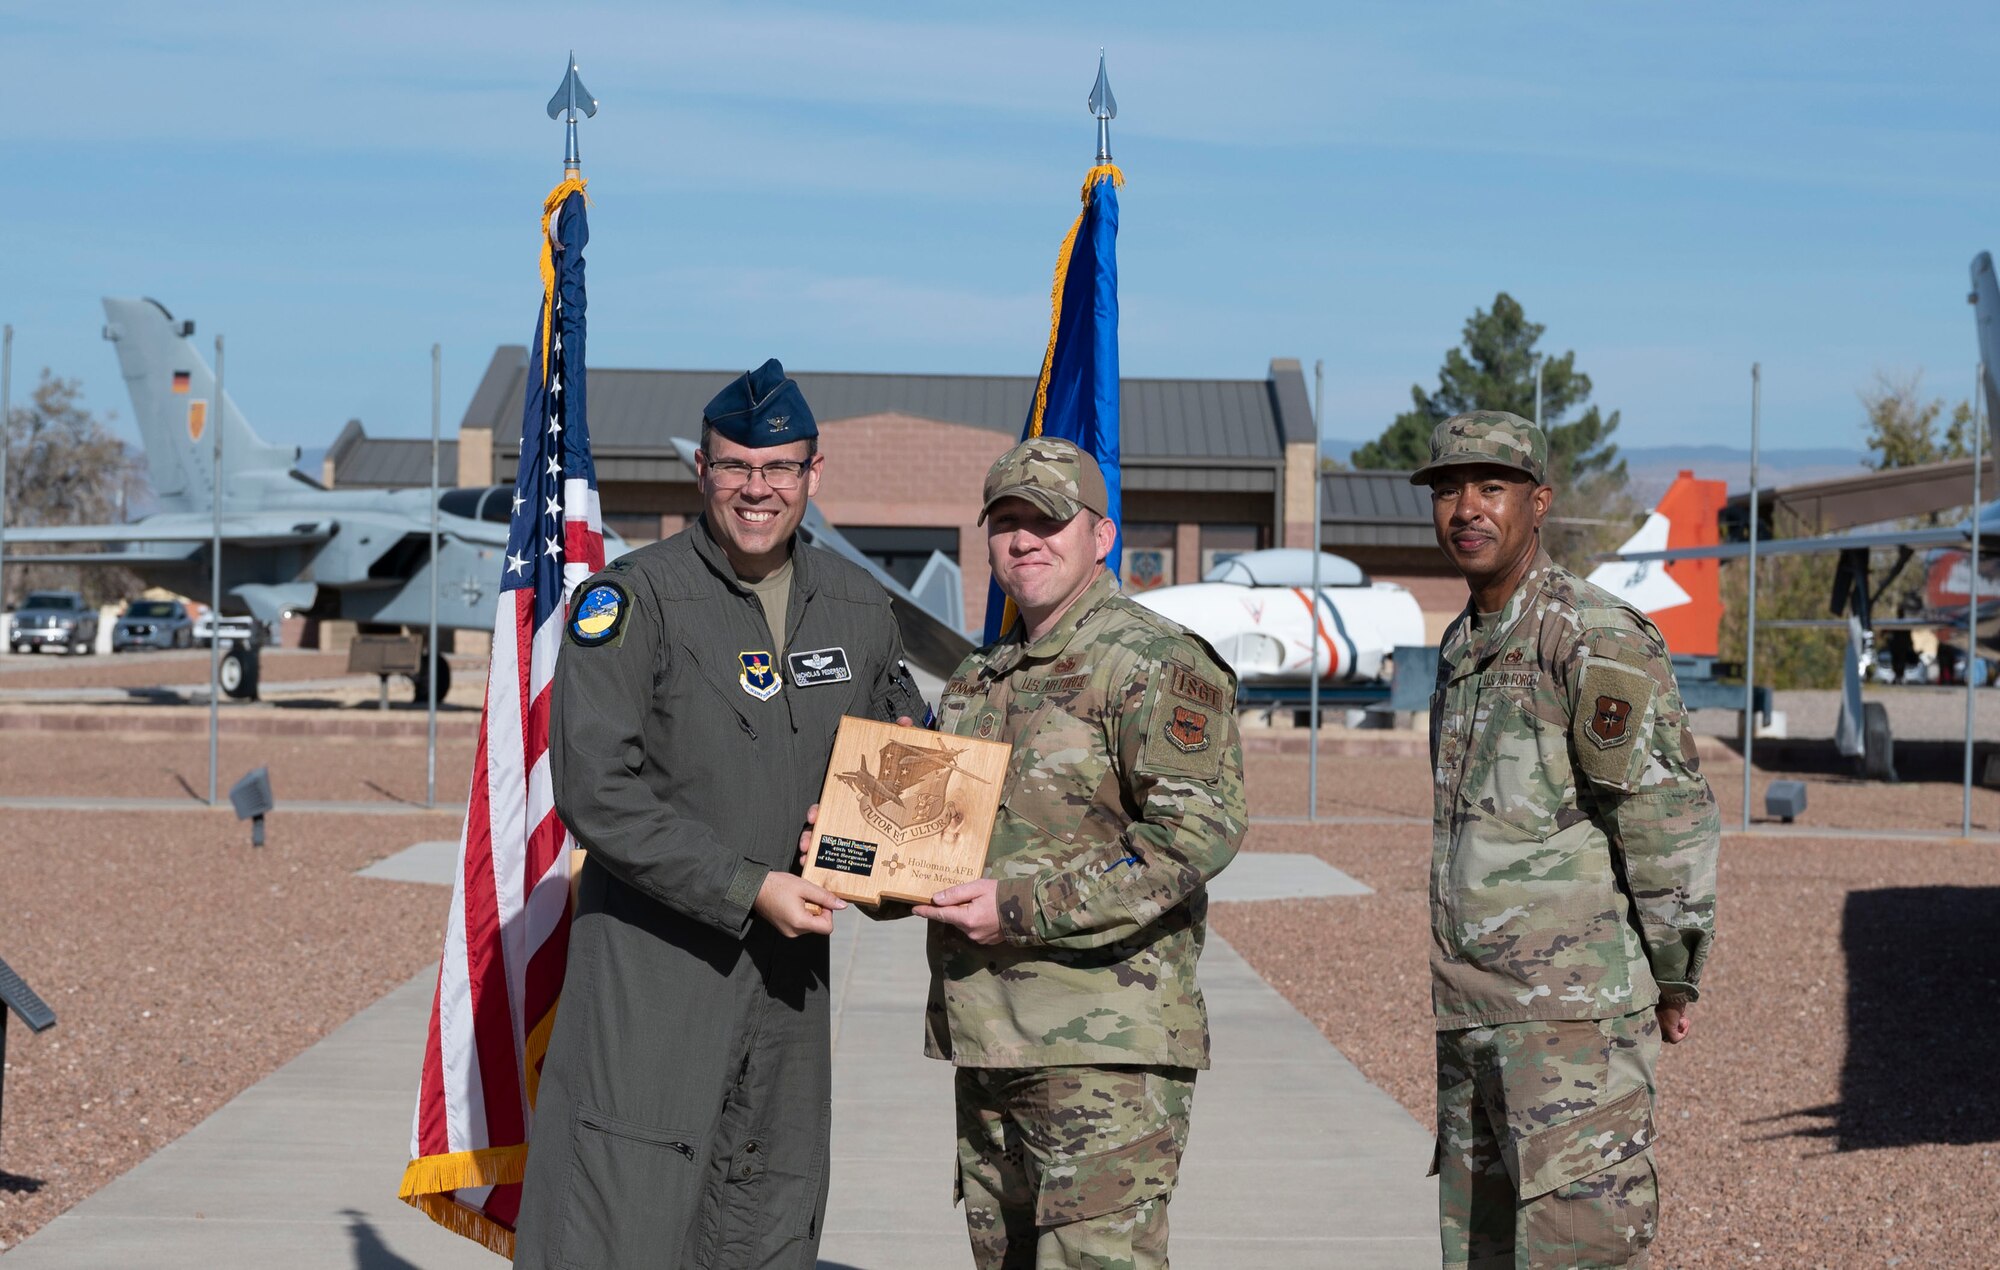 Senior Master Sgt. David Pennington, quarterly award winner, accepts the First Sergeant of the quarter award during the 49th Wing’s 3rd quarter award ceremony, Nov. 19, 2021, on Holloman Air Force Base, New Mexico. Quarterly award winners were selected based on their technical expertise, demonstration of leadership and job performance. (U.S. Air Force photo by Airman 1st Class Antonio Salfran)